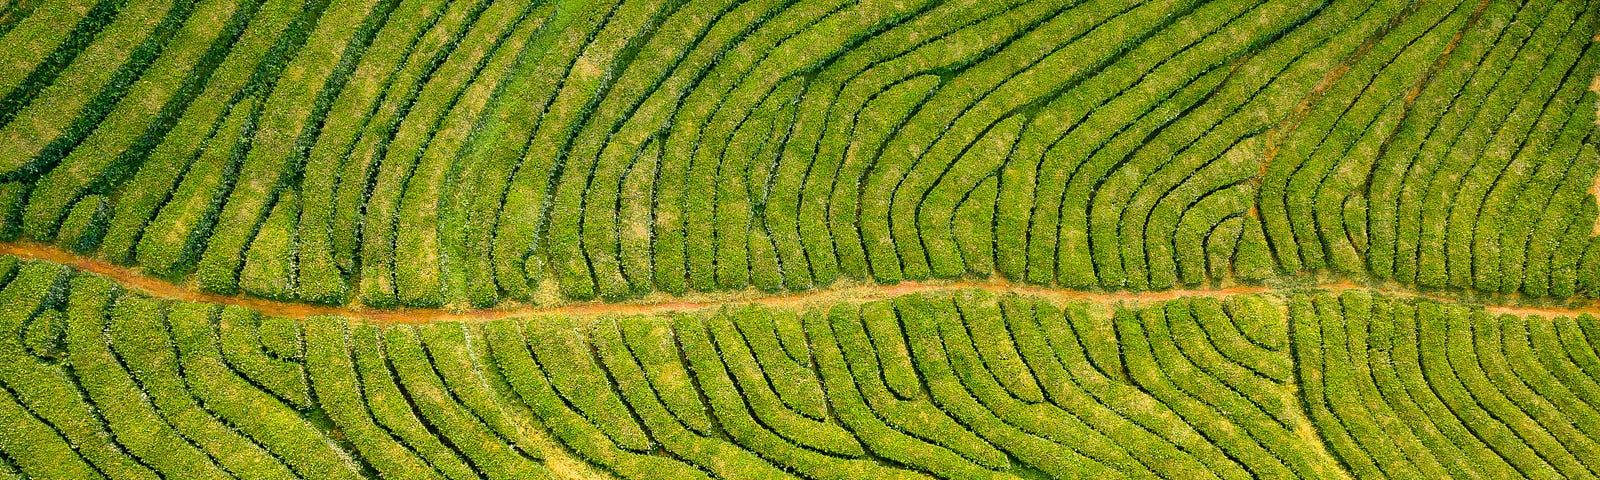 A sky view of wavy rows of green crops with a dirt road intersecting them across the middle of the image